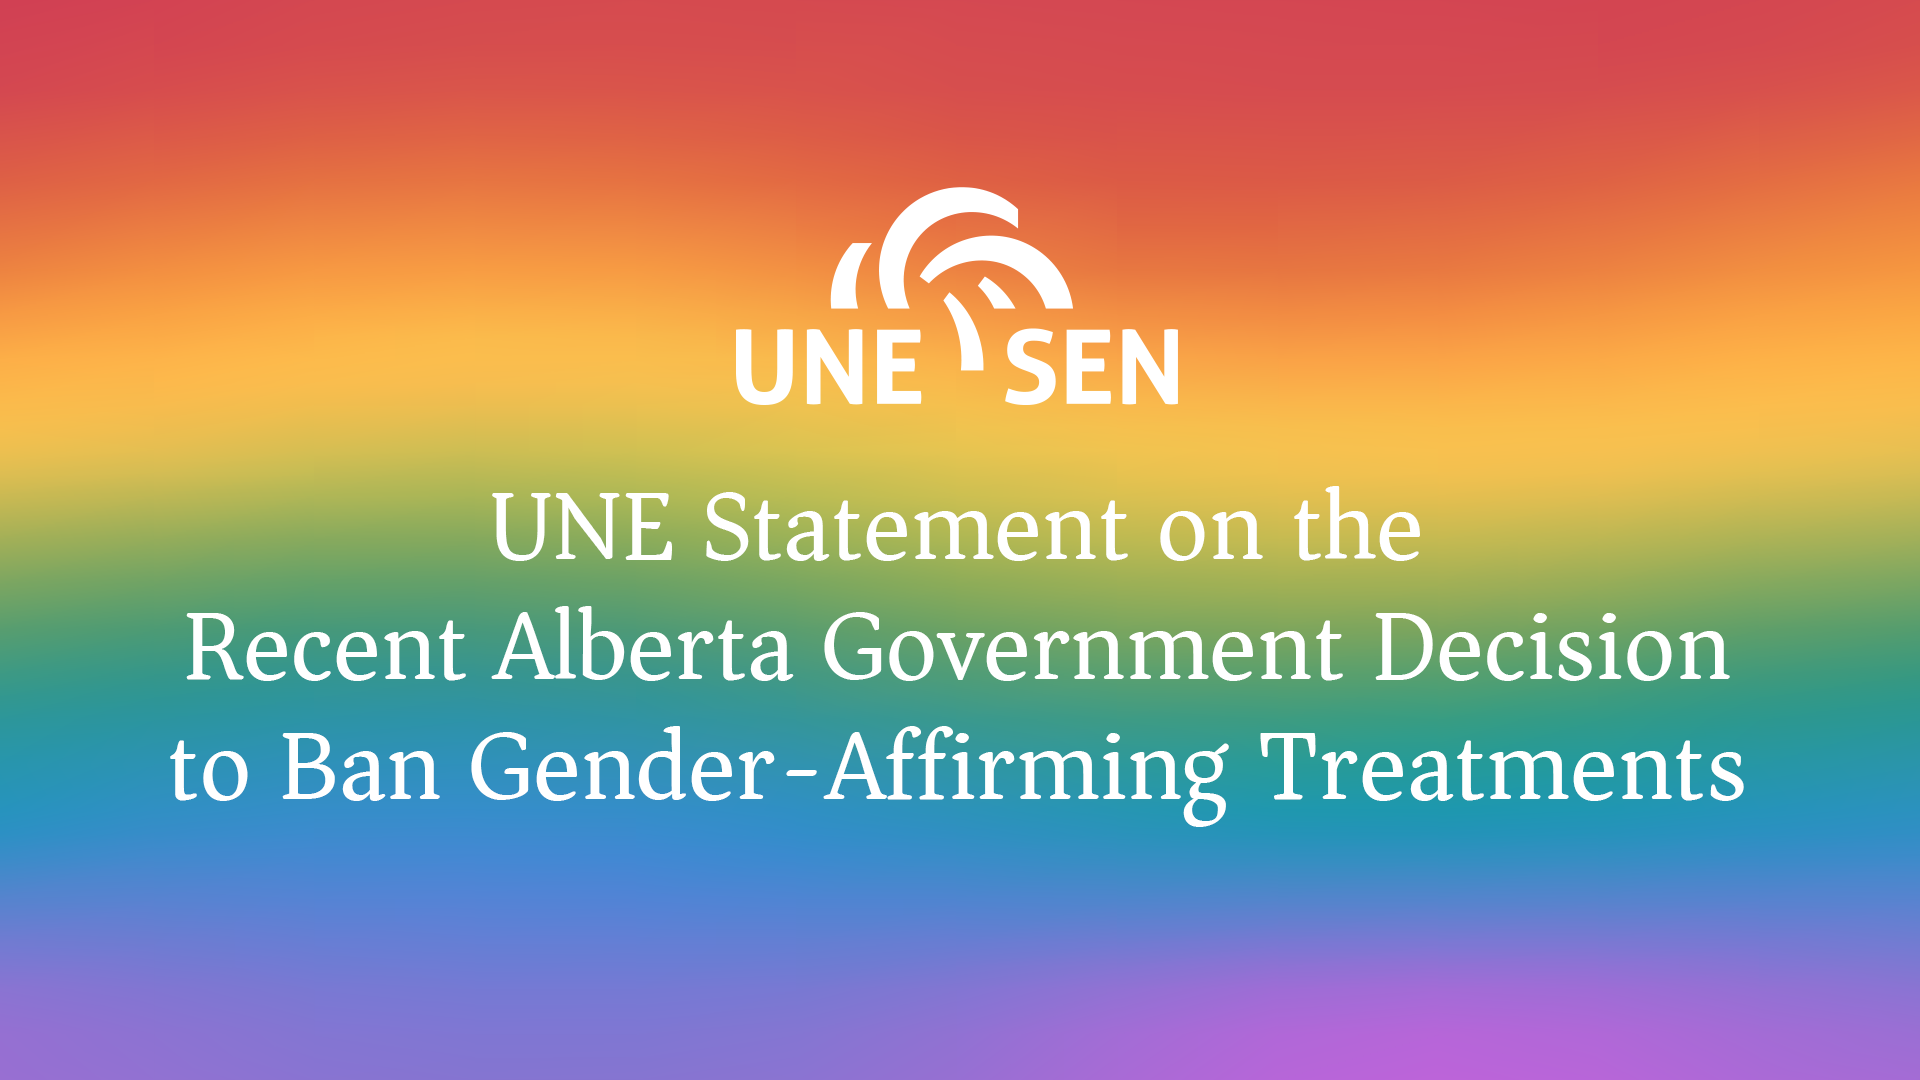 UNE Statement on the Recent Alberta Government Decision to Ban Gender-Affirming Treatments